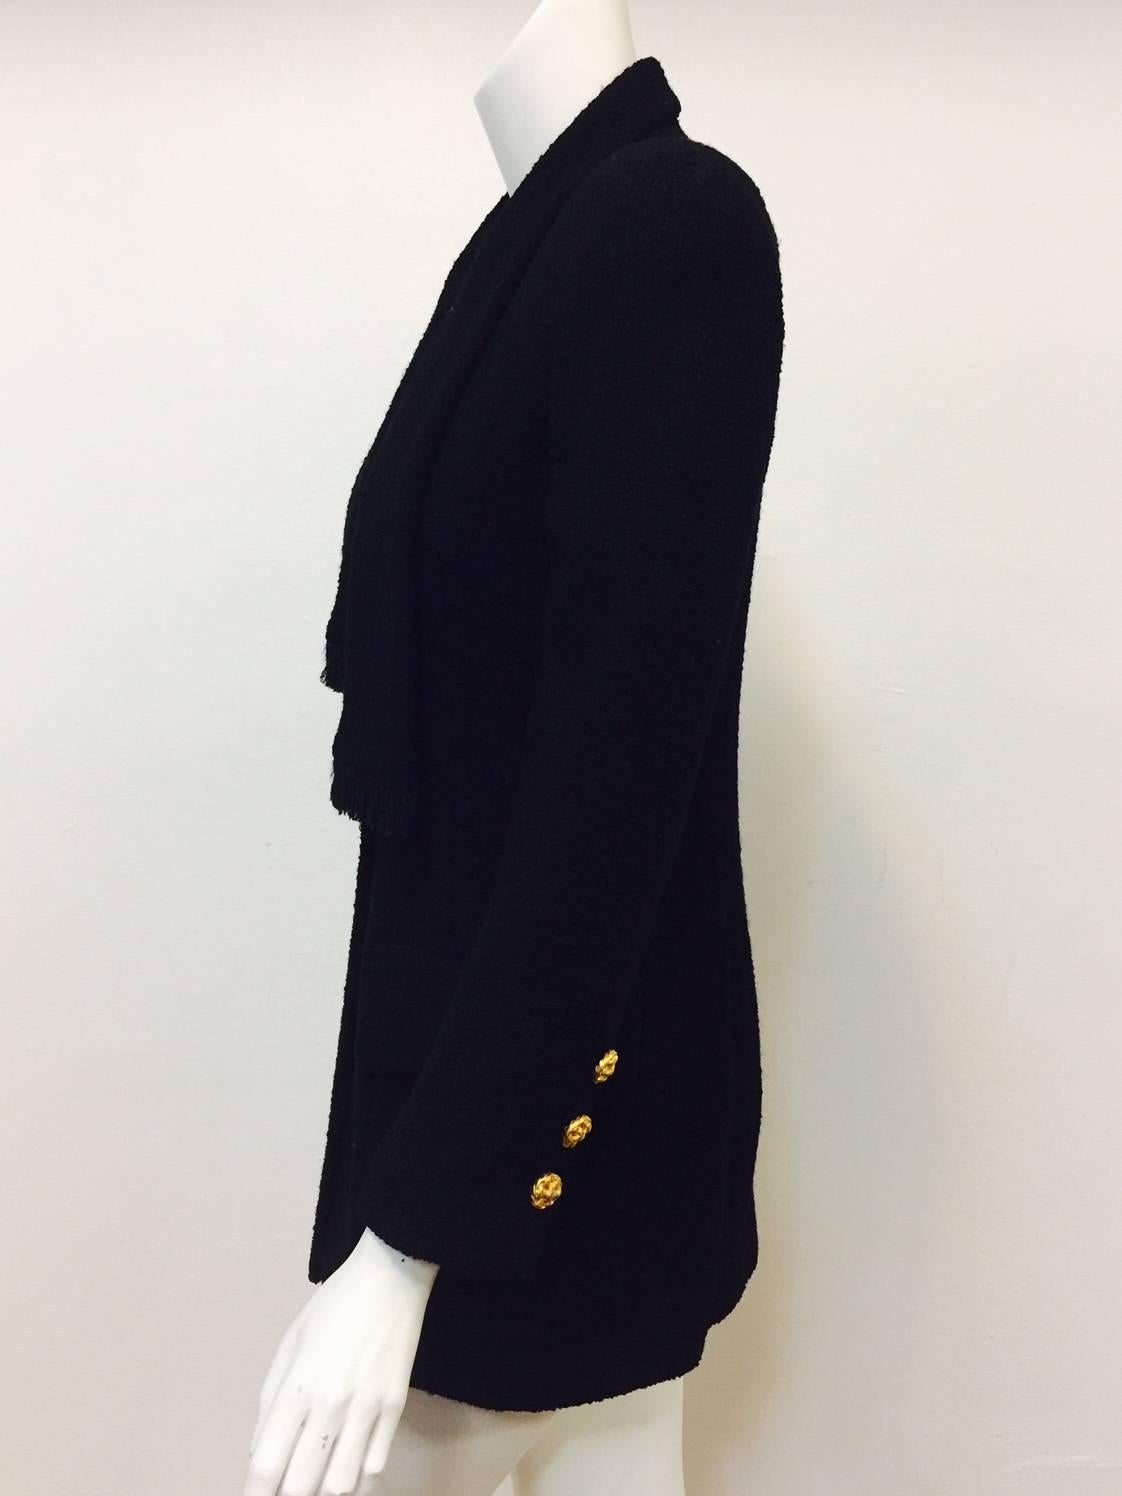 Chanel Fall 1992 Black Boucle Wool Jacket W Gold Tone Basket Weave Buttons 1